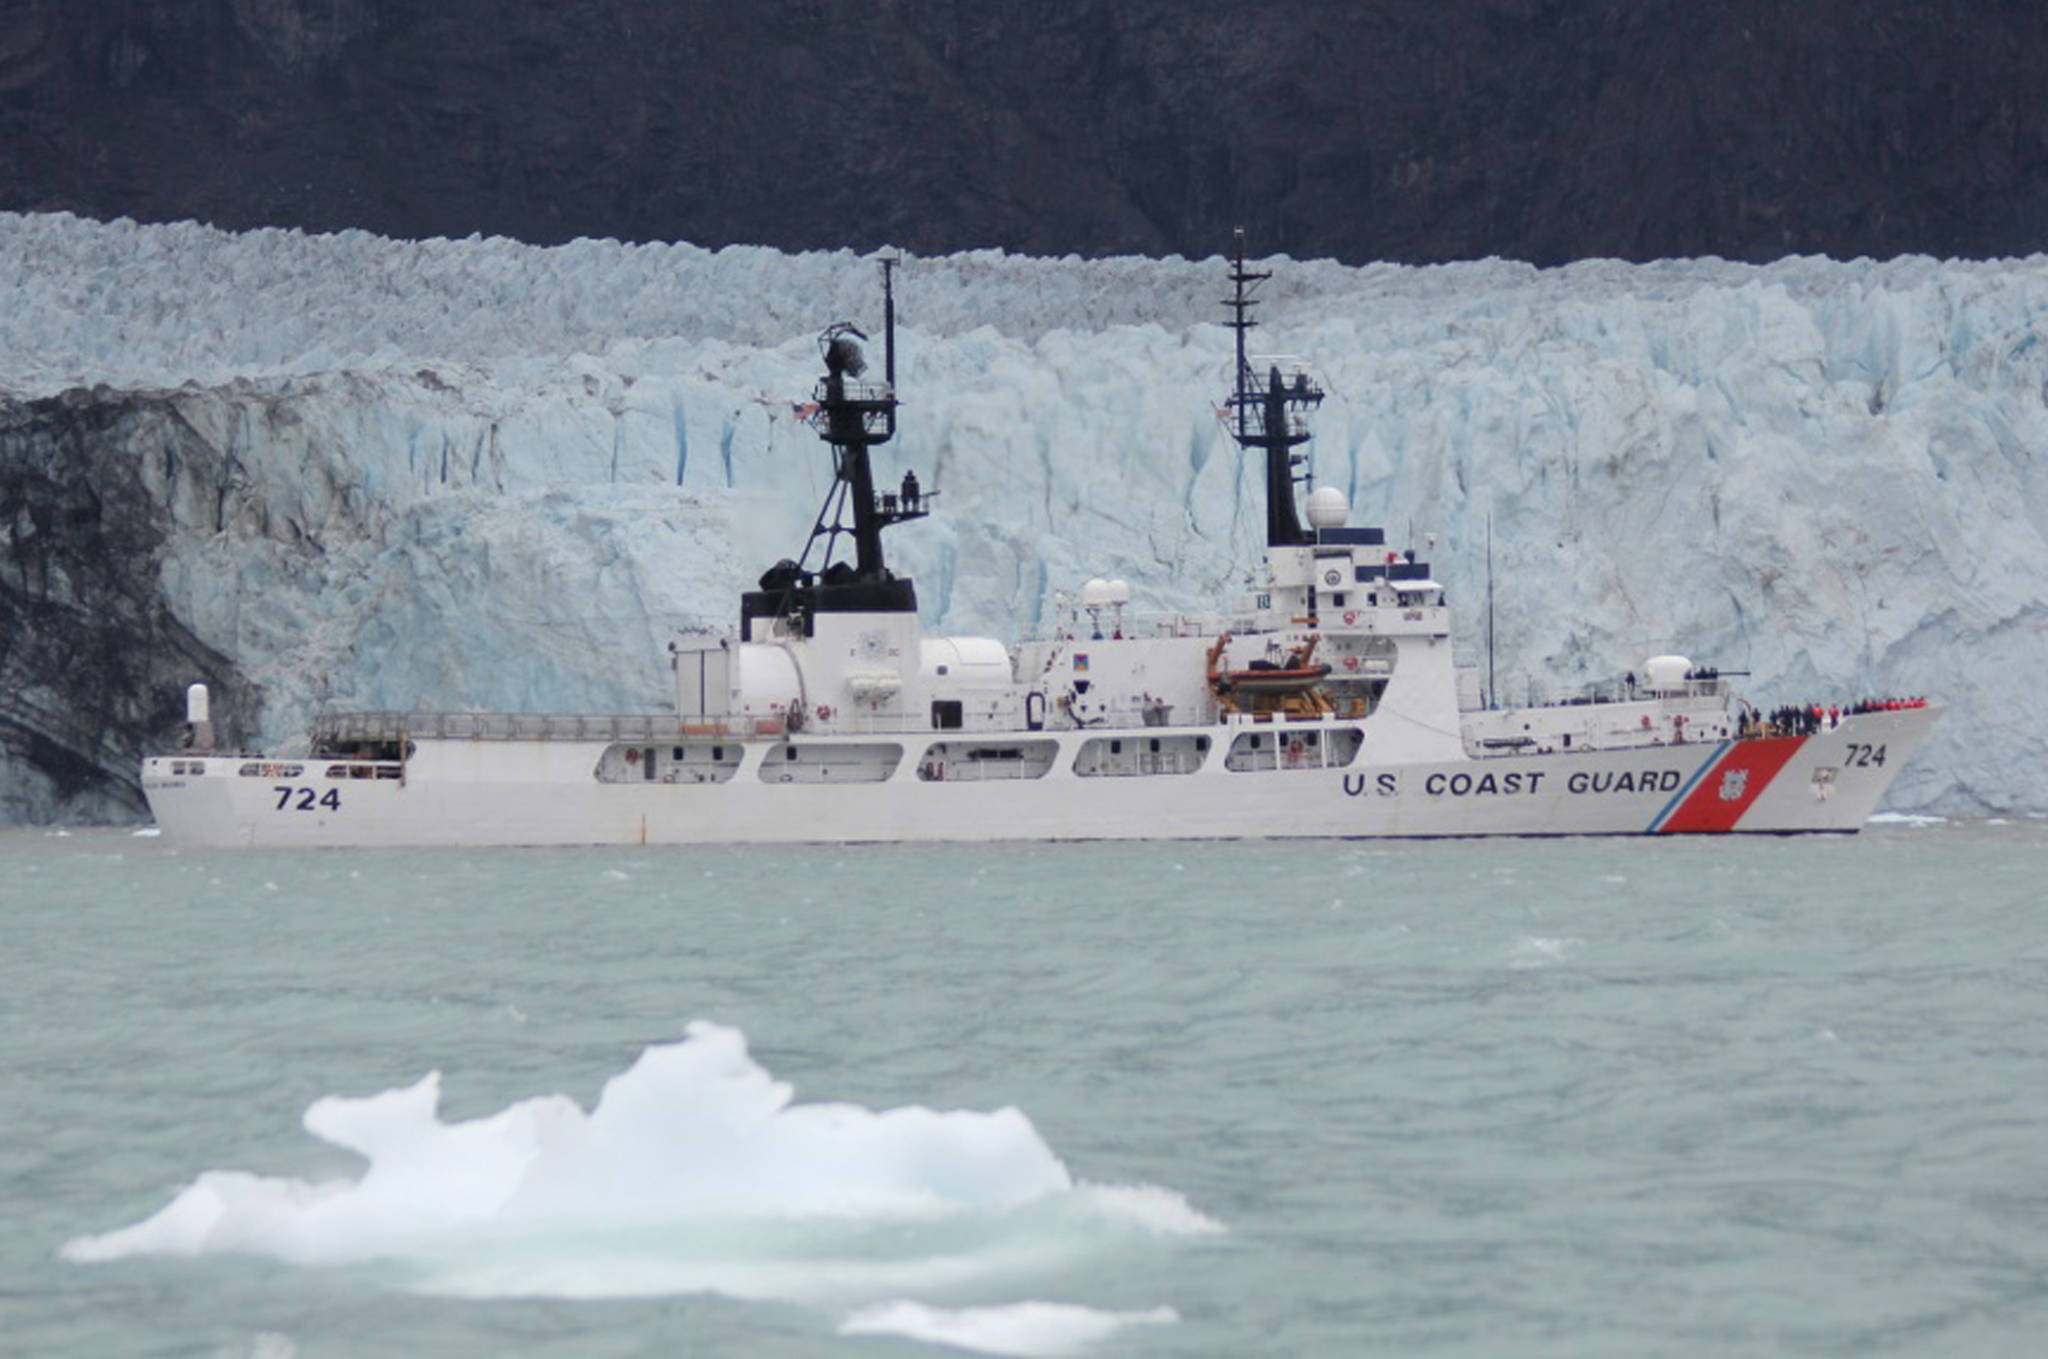 The Coast Guard Cutter Douglas Munro sails past Margerie Glacier in Glacier Bay National Park, Alaska, July 15, 2018. The Douglas Munro crew assisted the Glacier Bay National Park Service personnel in rescuing four people whose kayaks overturned in rough waters, but all four people made it to shore. (U.S. Coast Guard | Courtesy Photo)